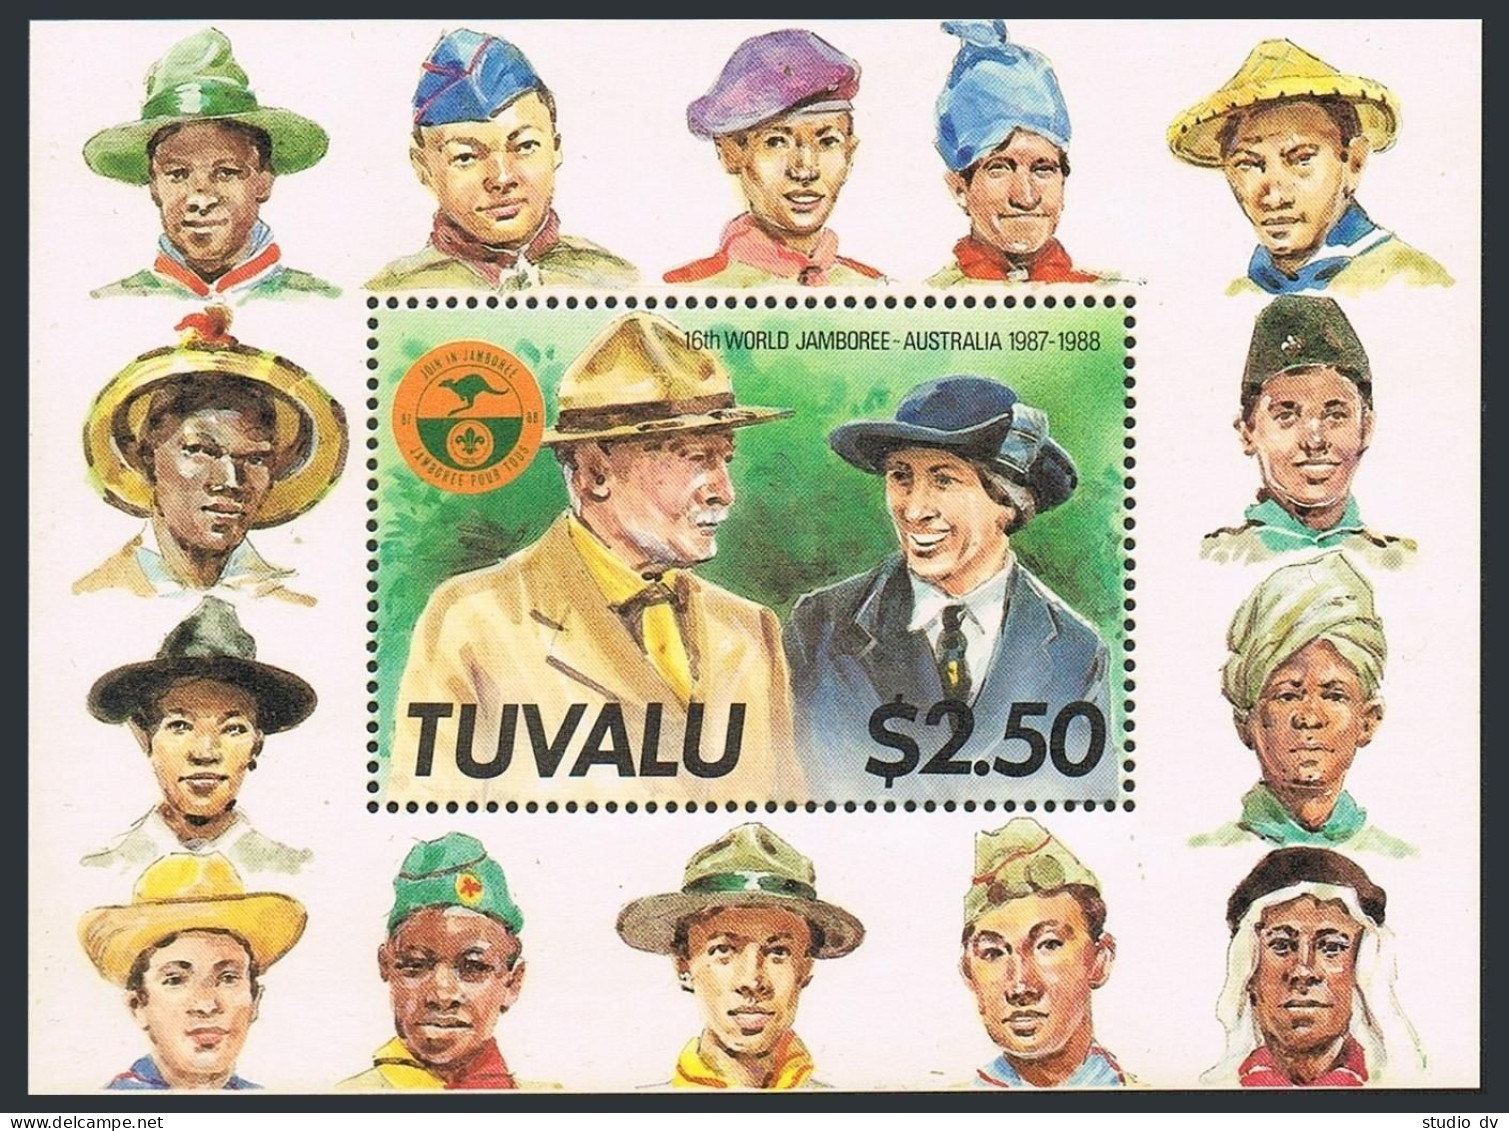 Tuvalu 464,MNH.Michel 484 Bl.31. Scouting 1987.Lord And Lady Baden Powell,Scouts - Tuvalu